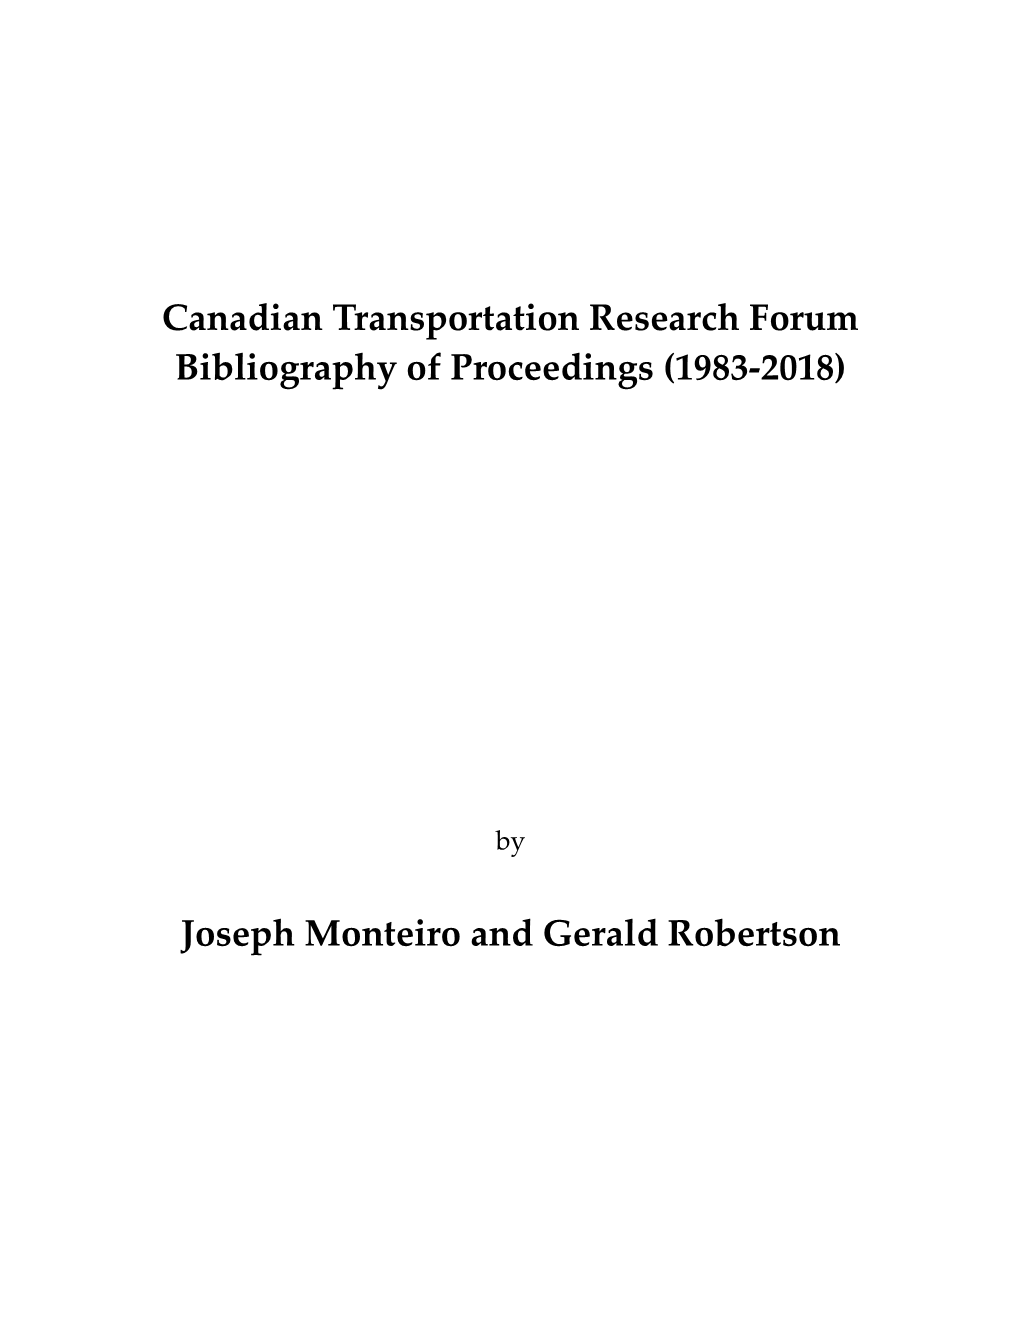 Canadian Transportation Research Forum Bibliography of Proceedings (1983-2018)